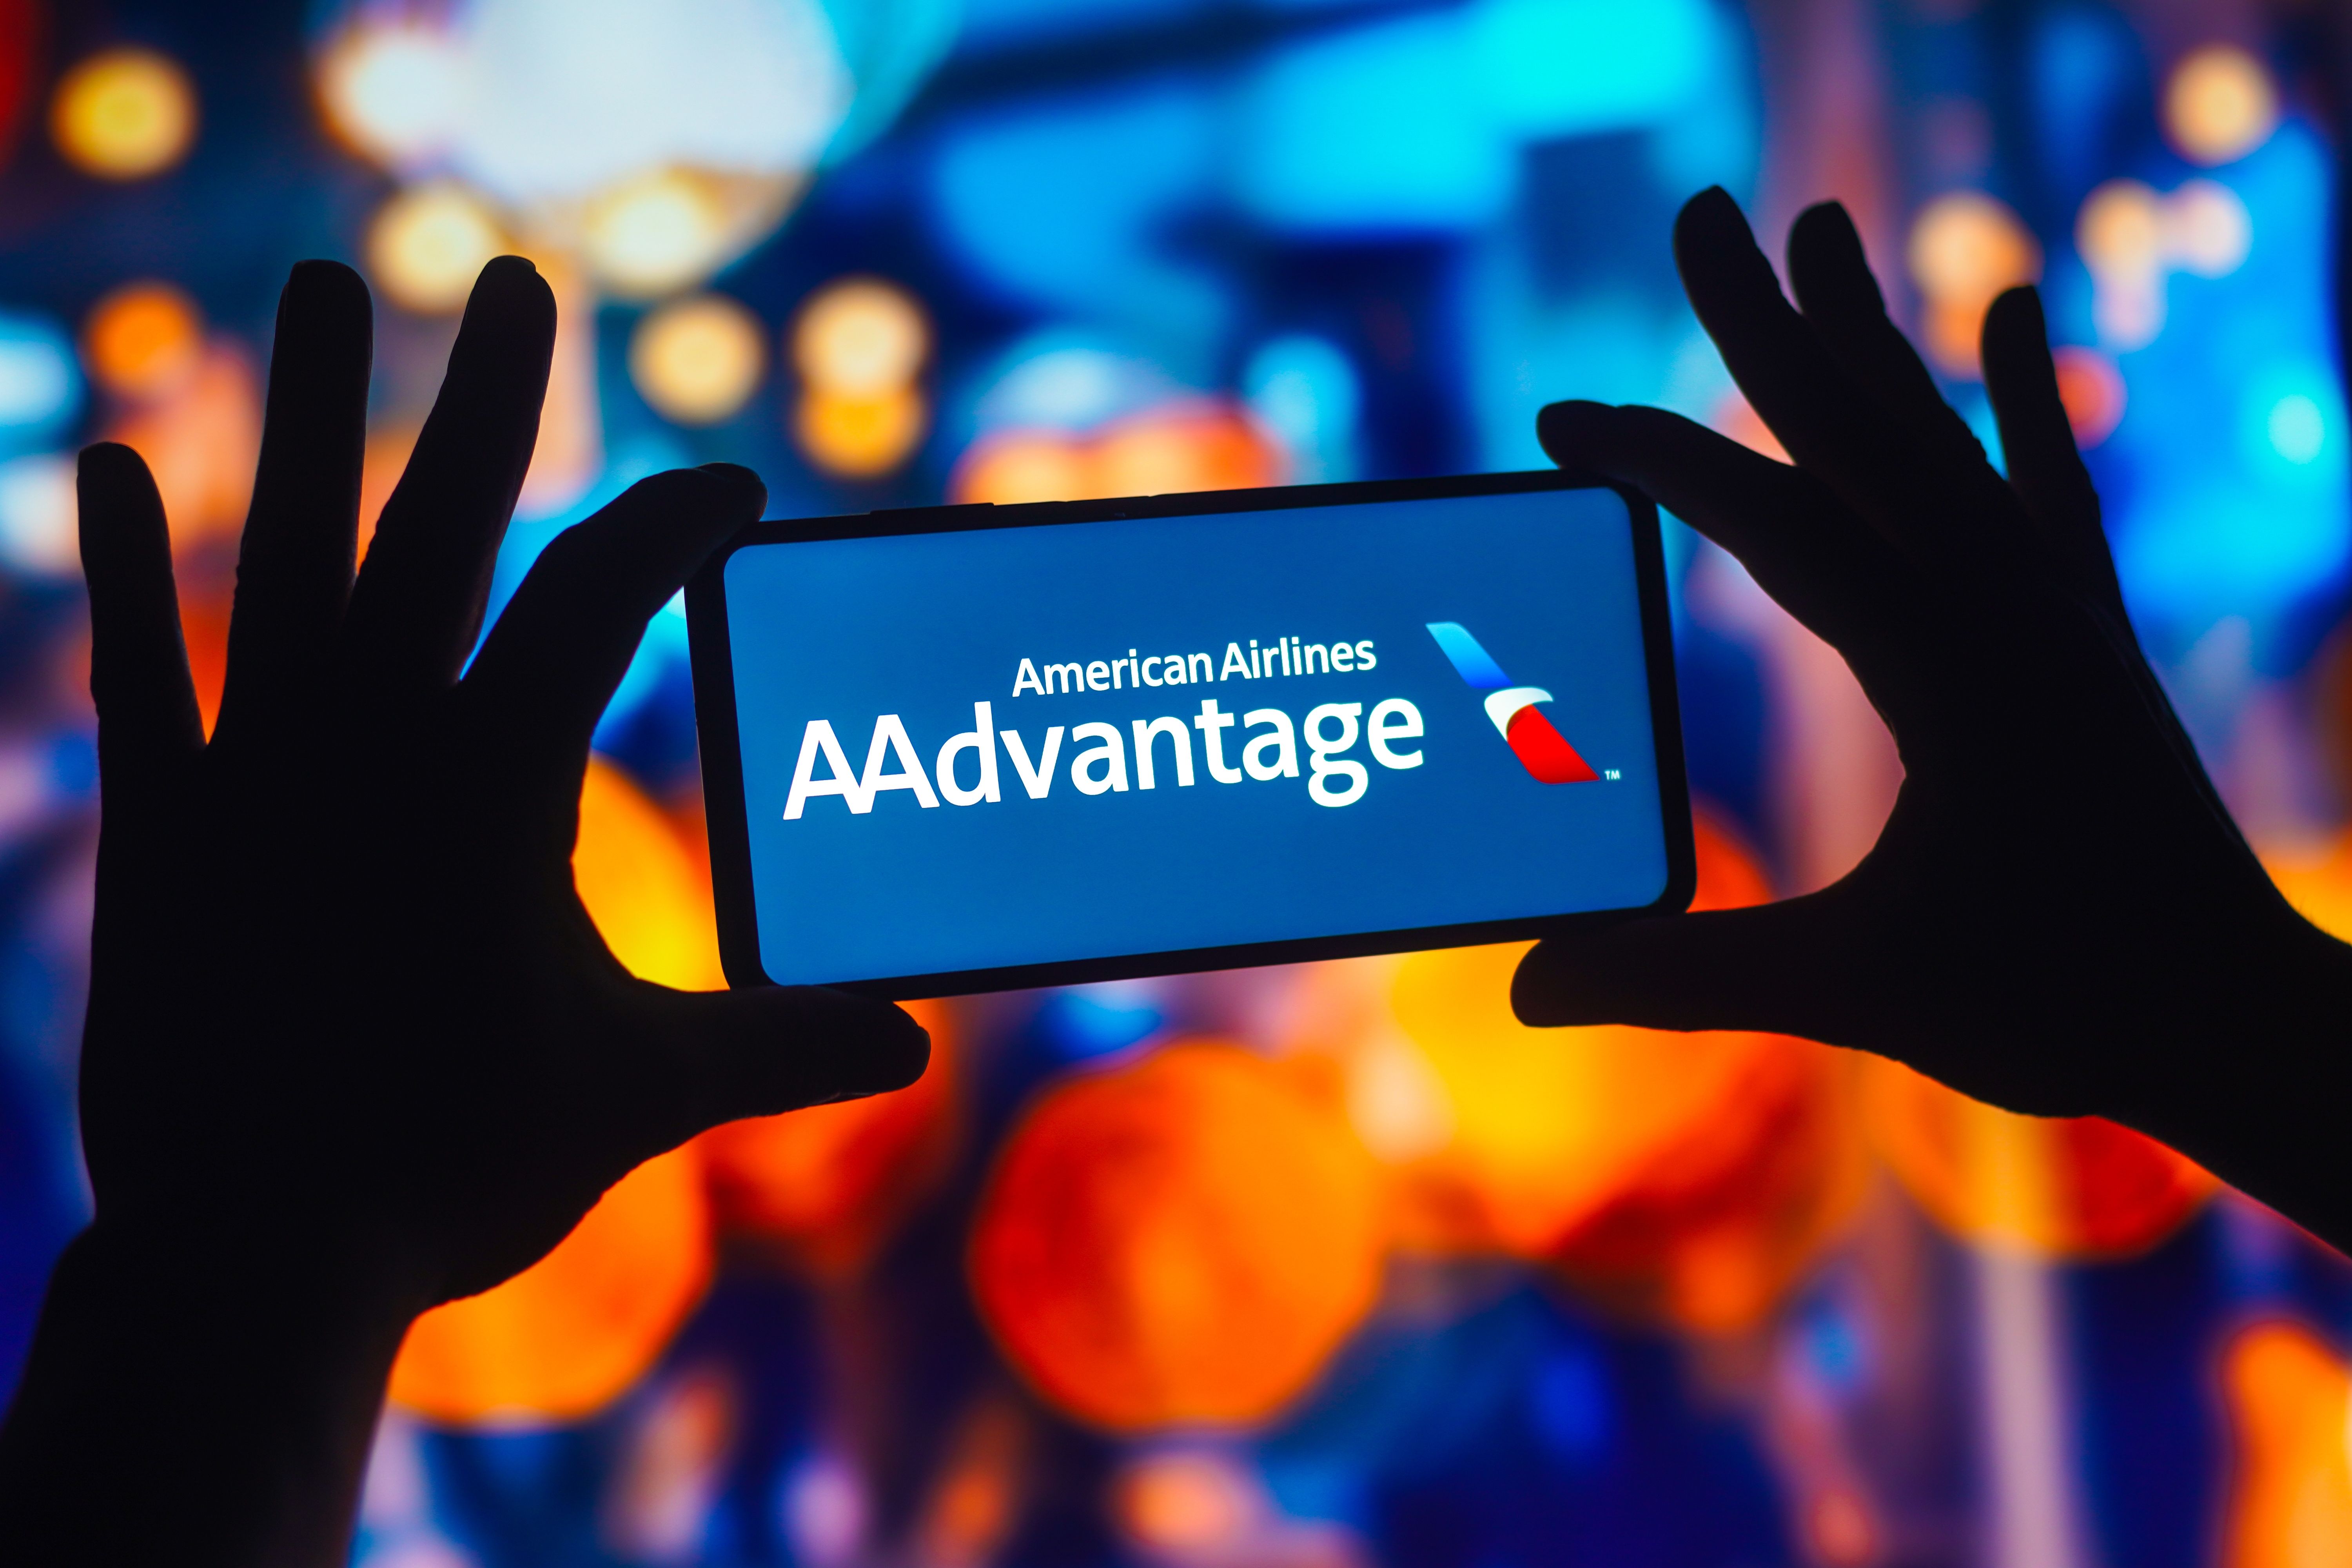 A person holding a cell phone with the American Airlines AAdvantage logo on it.